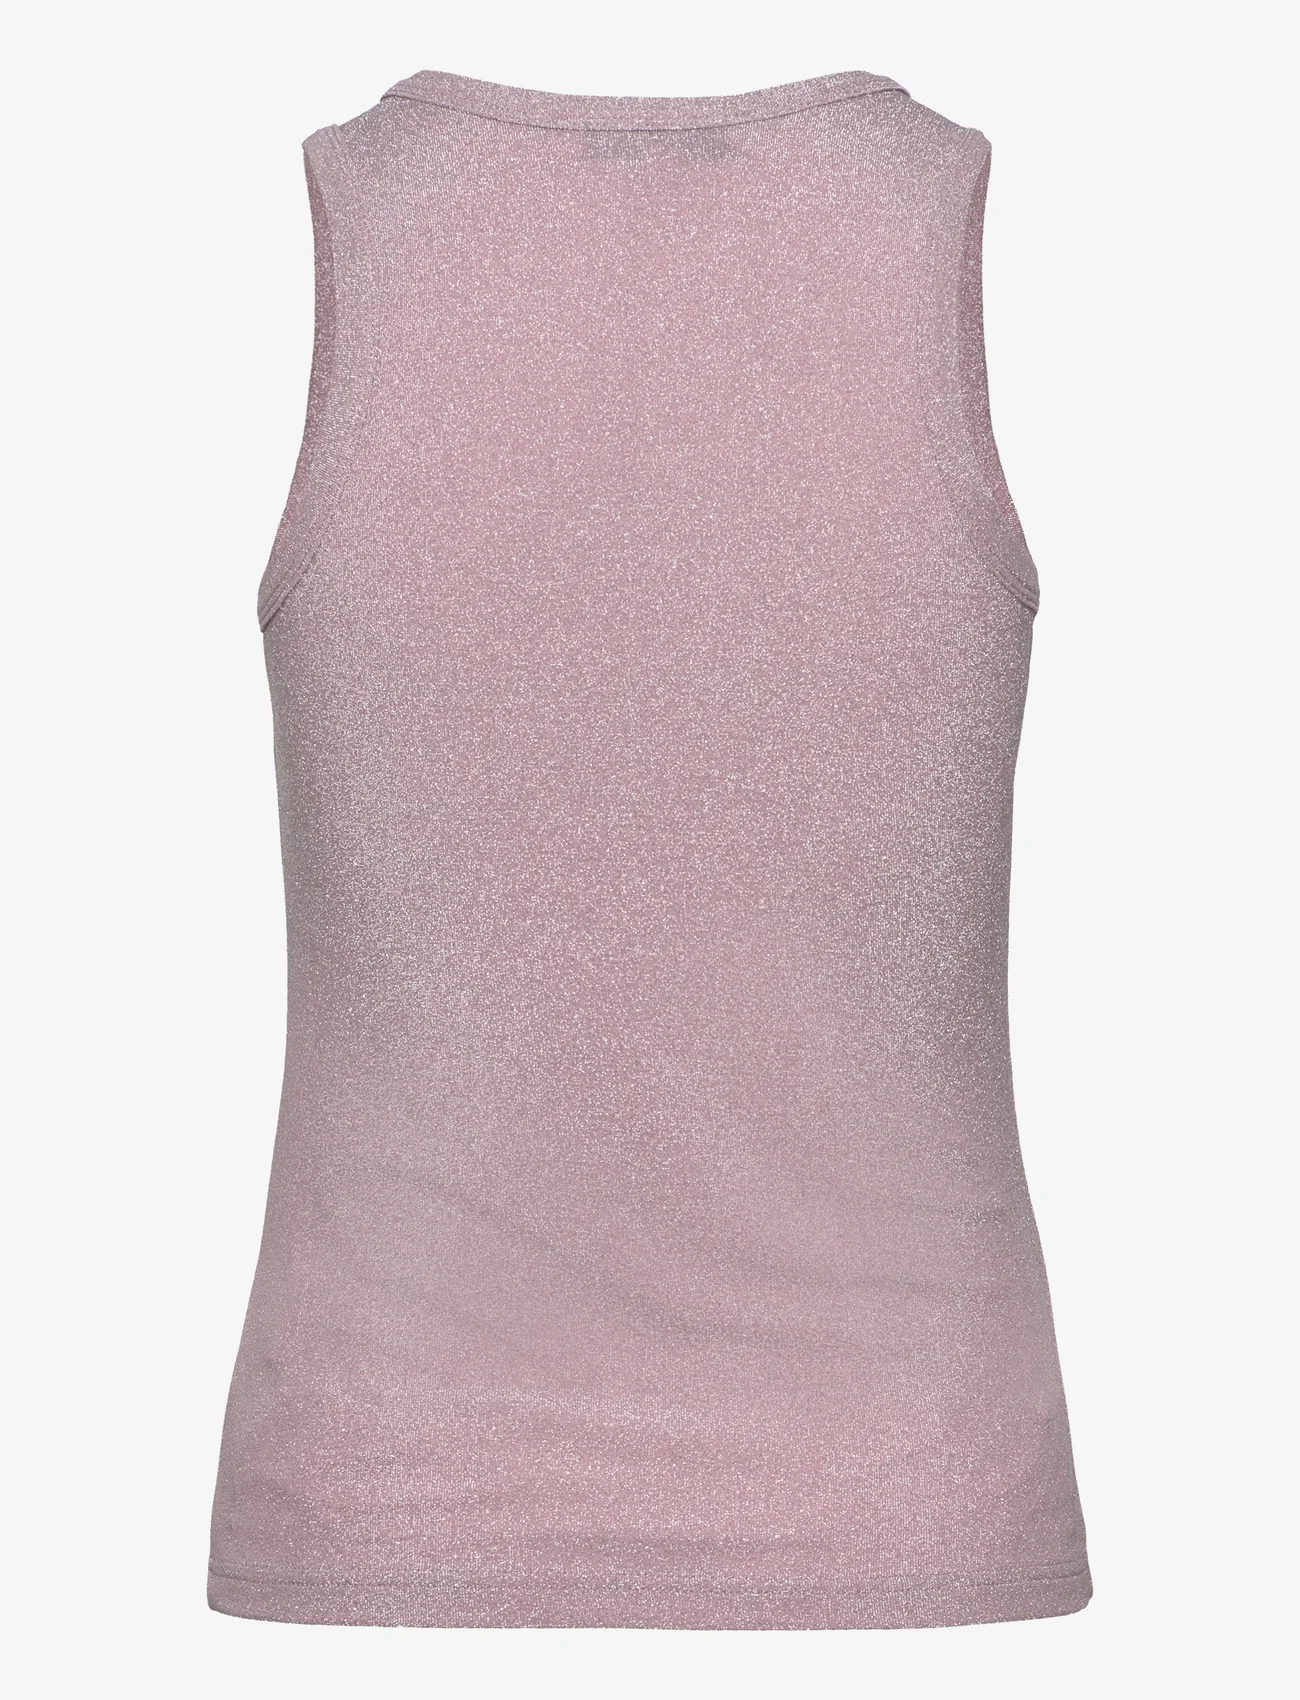 A-View - Eva tank top - lowest prices - rose - 1